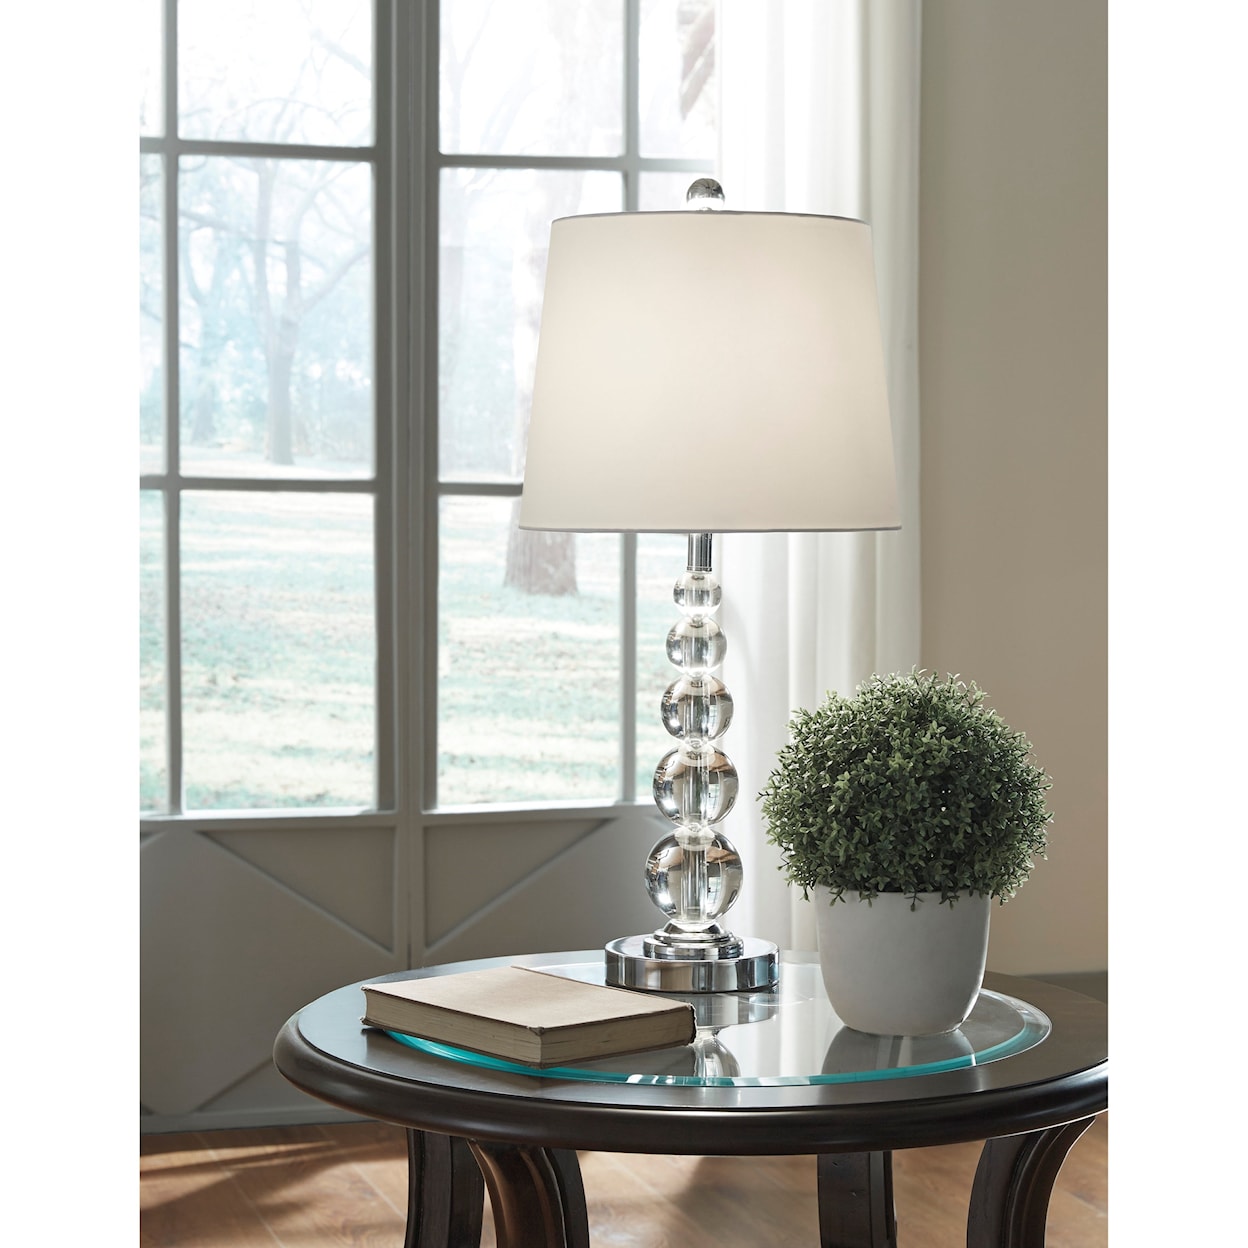 Signature Design by Ashley Lamps - Contemporary Set of 2 Joaquin Clear/Silver Table Lamps